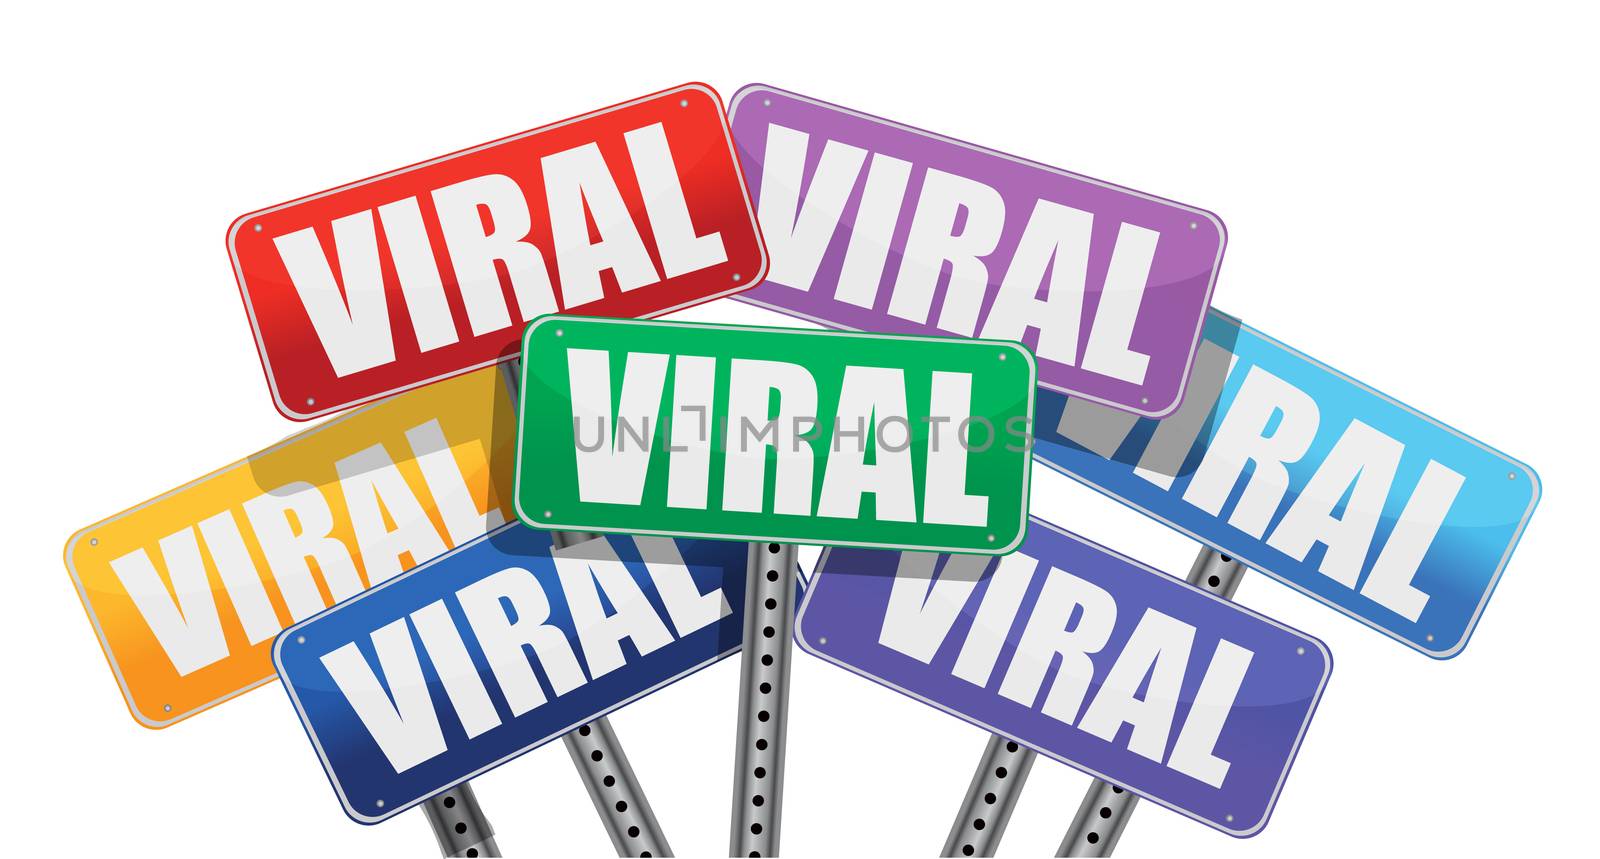 Viral marketing signs concept design on white background